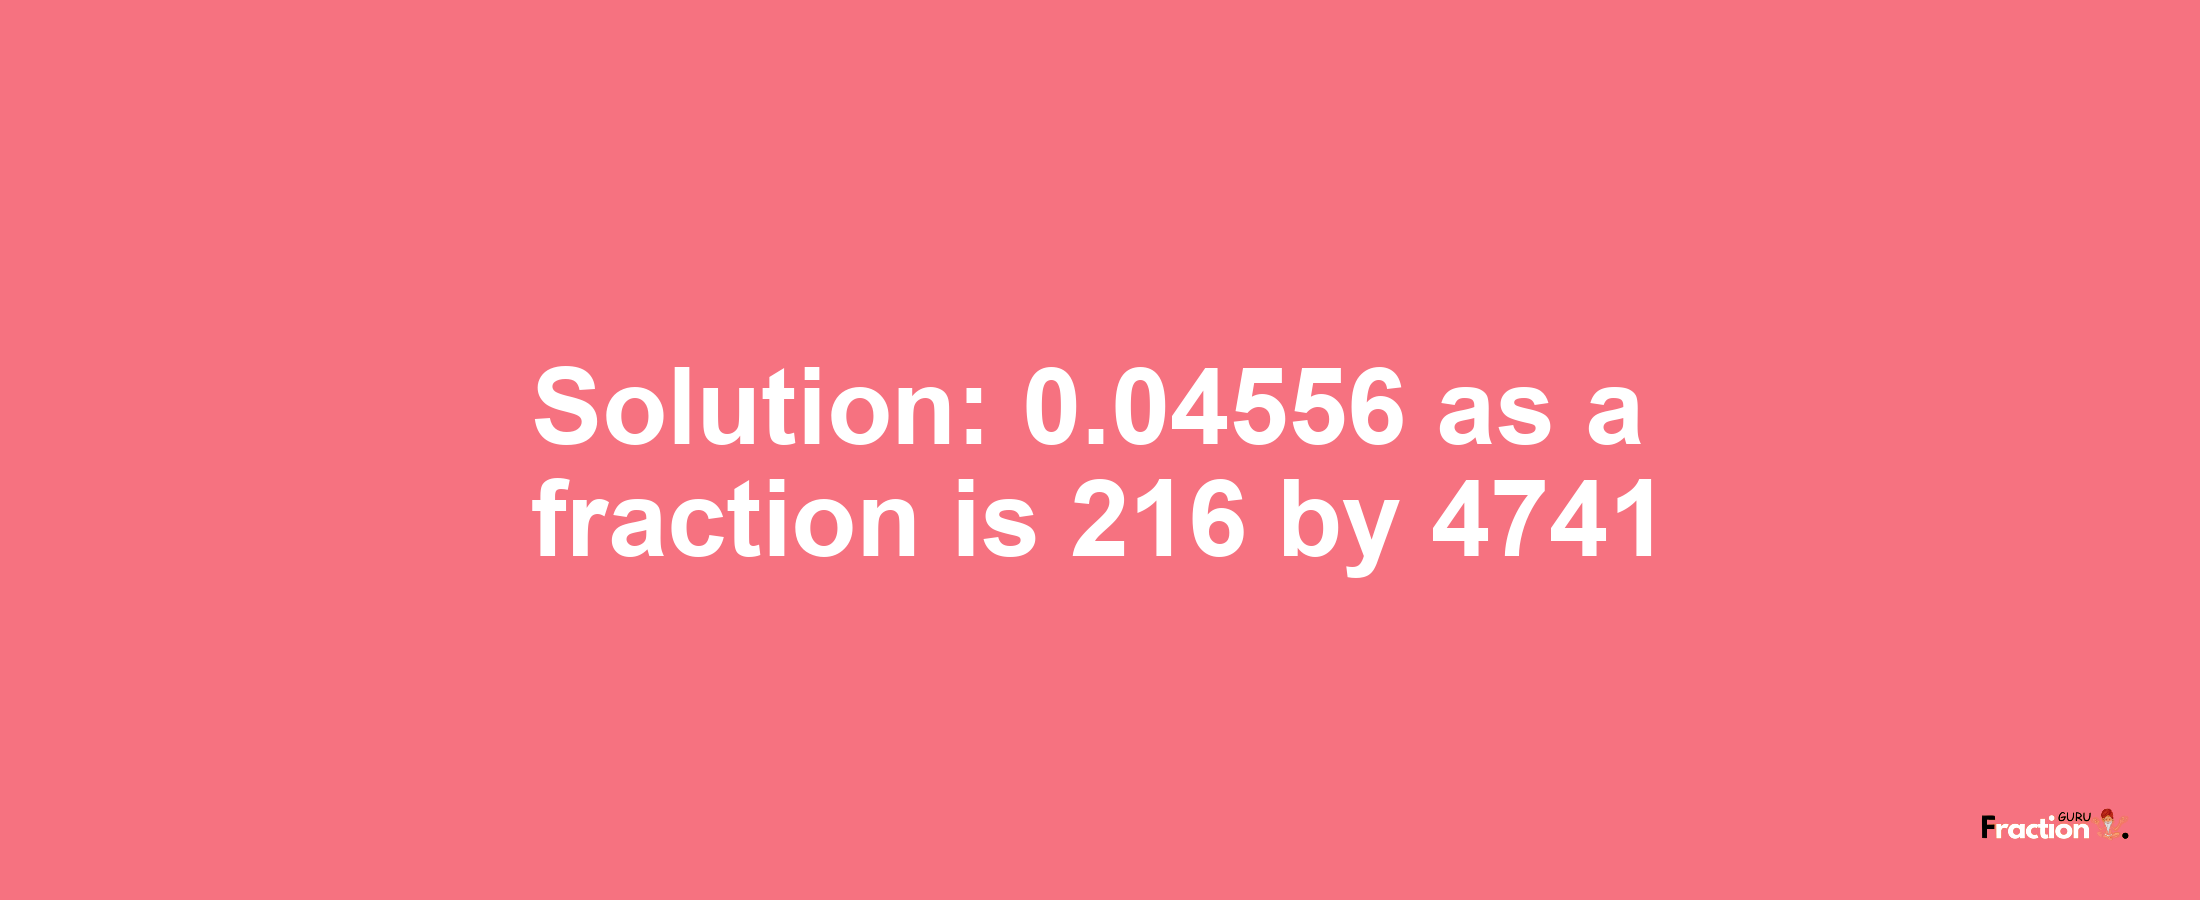 Solution:0.04556 as a fraction is 216/4741